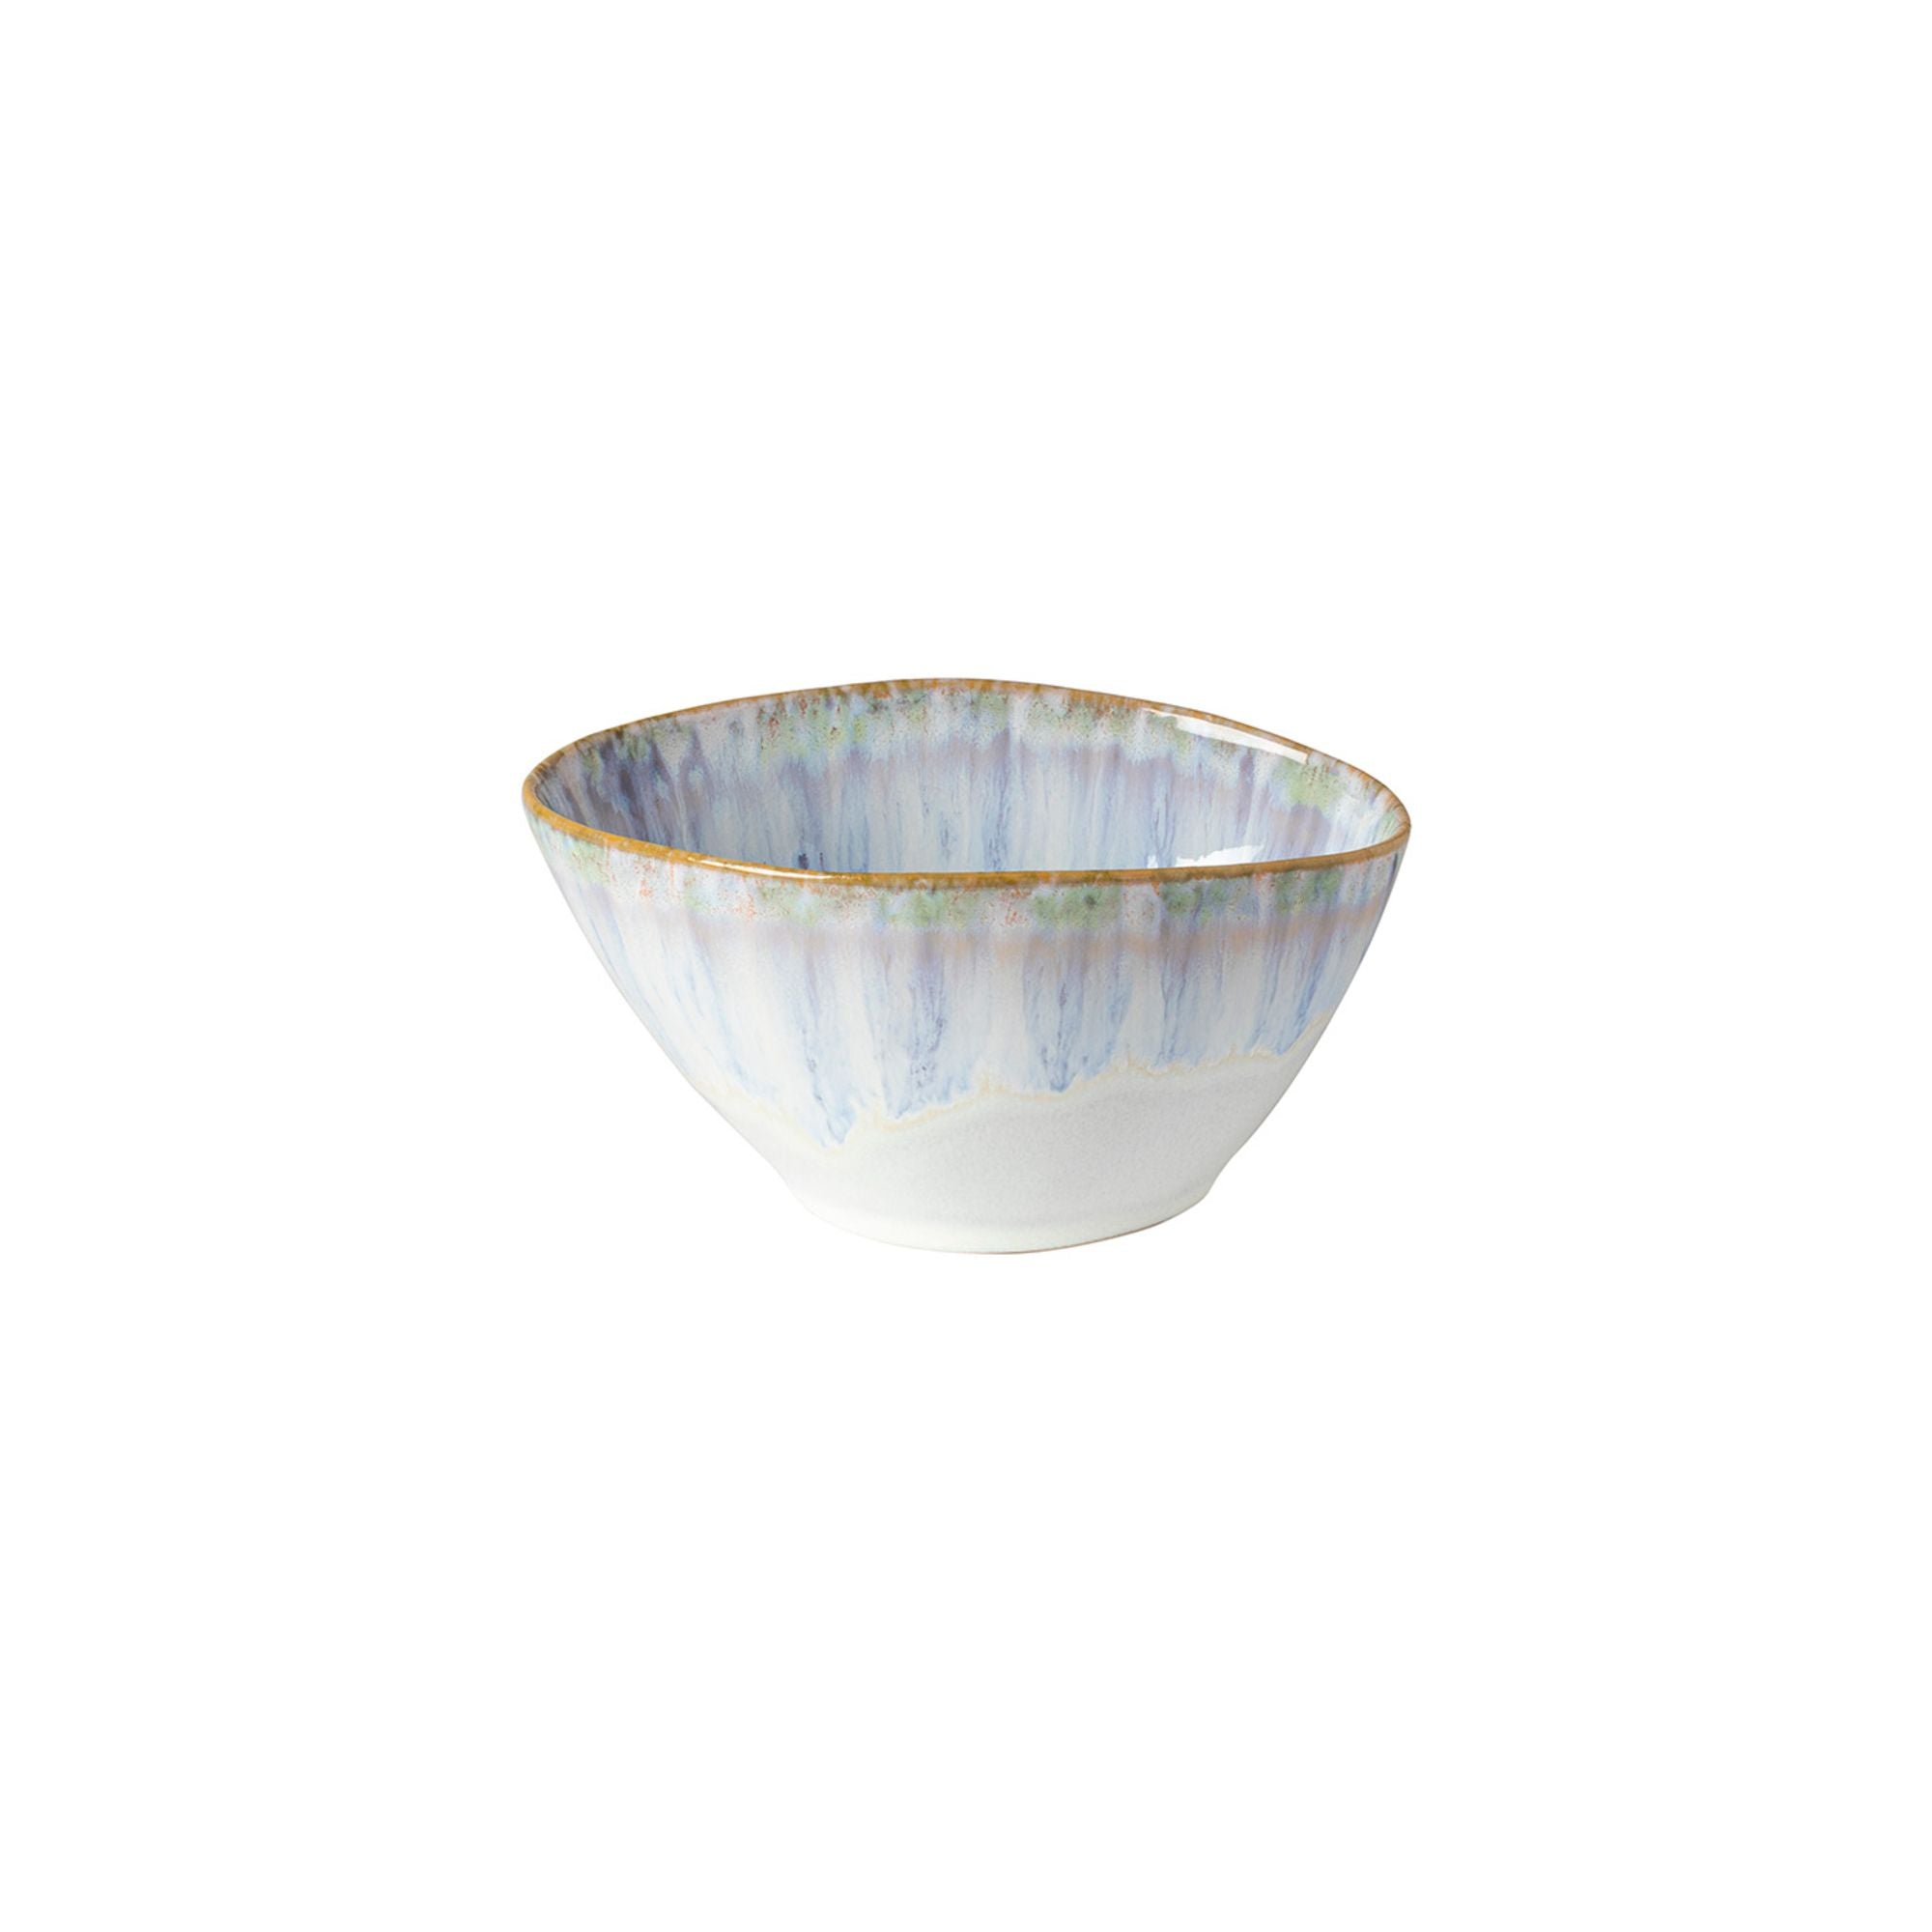 Brisa Oval Soup/Cereal Bowl 6" Ria Blue